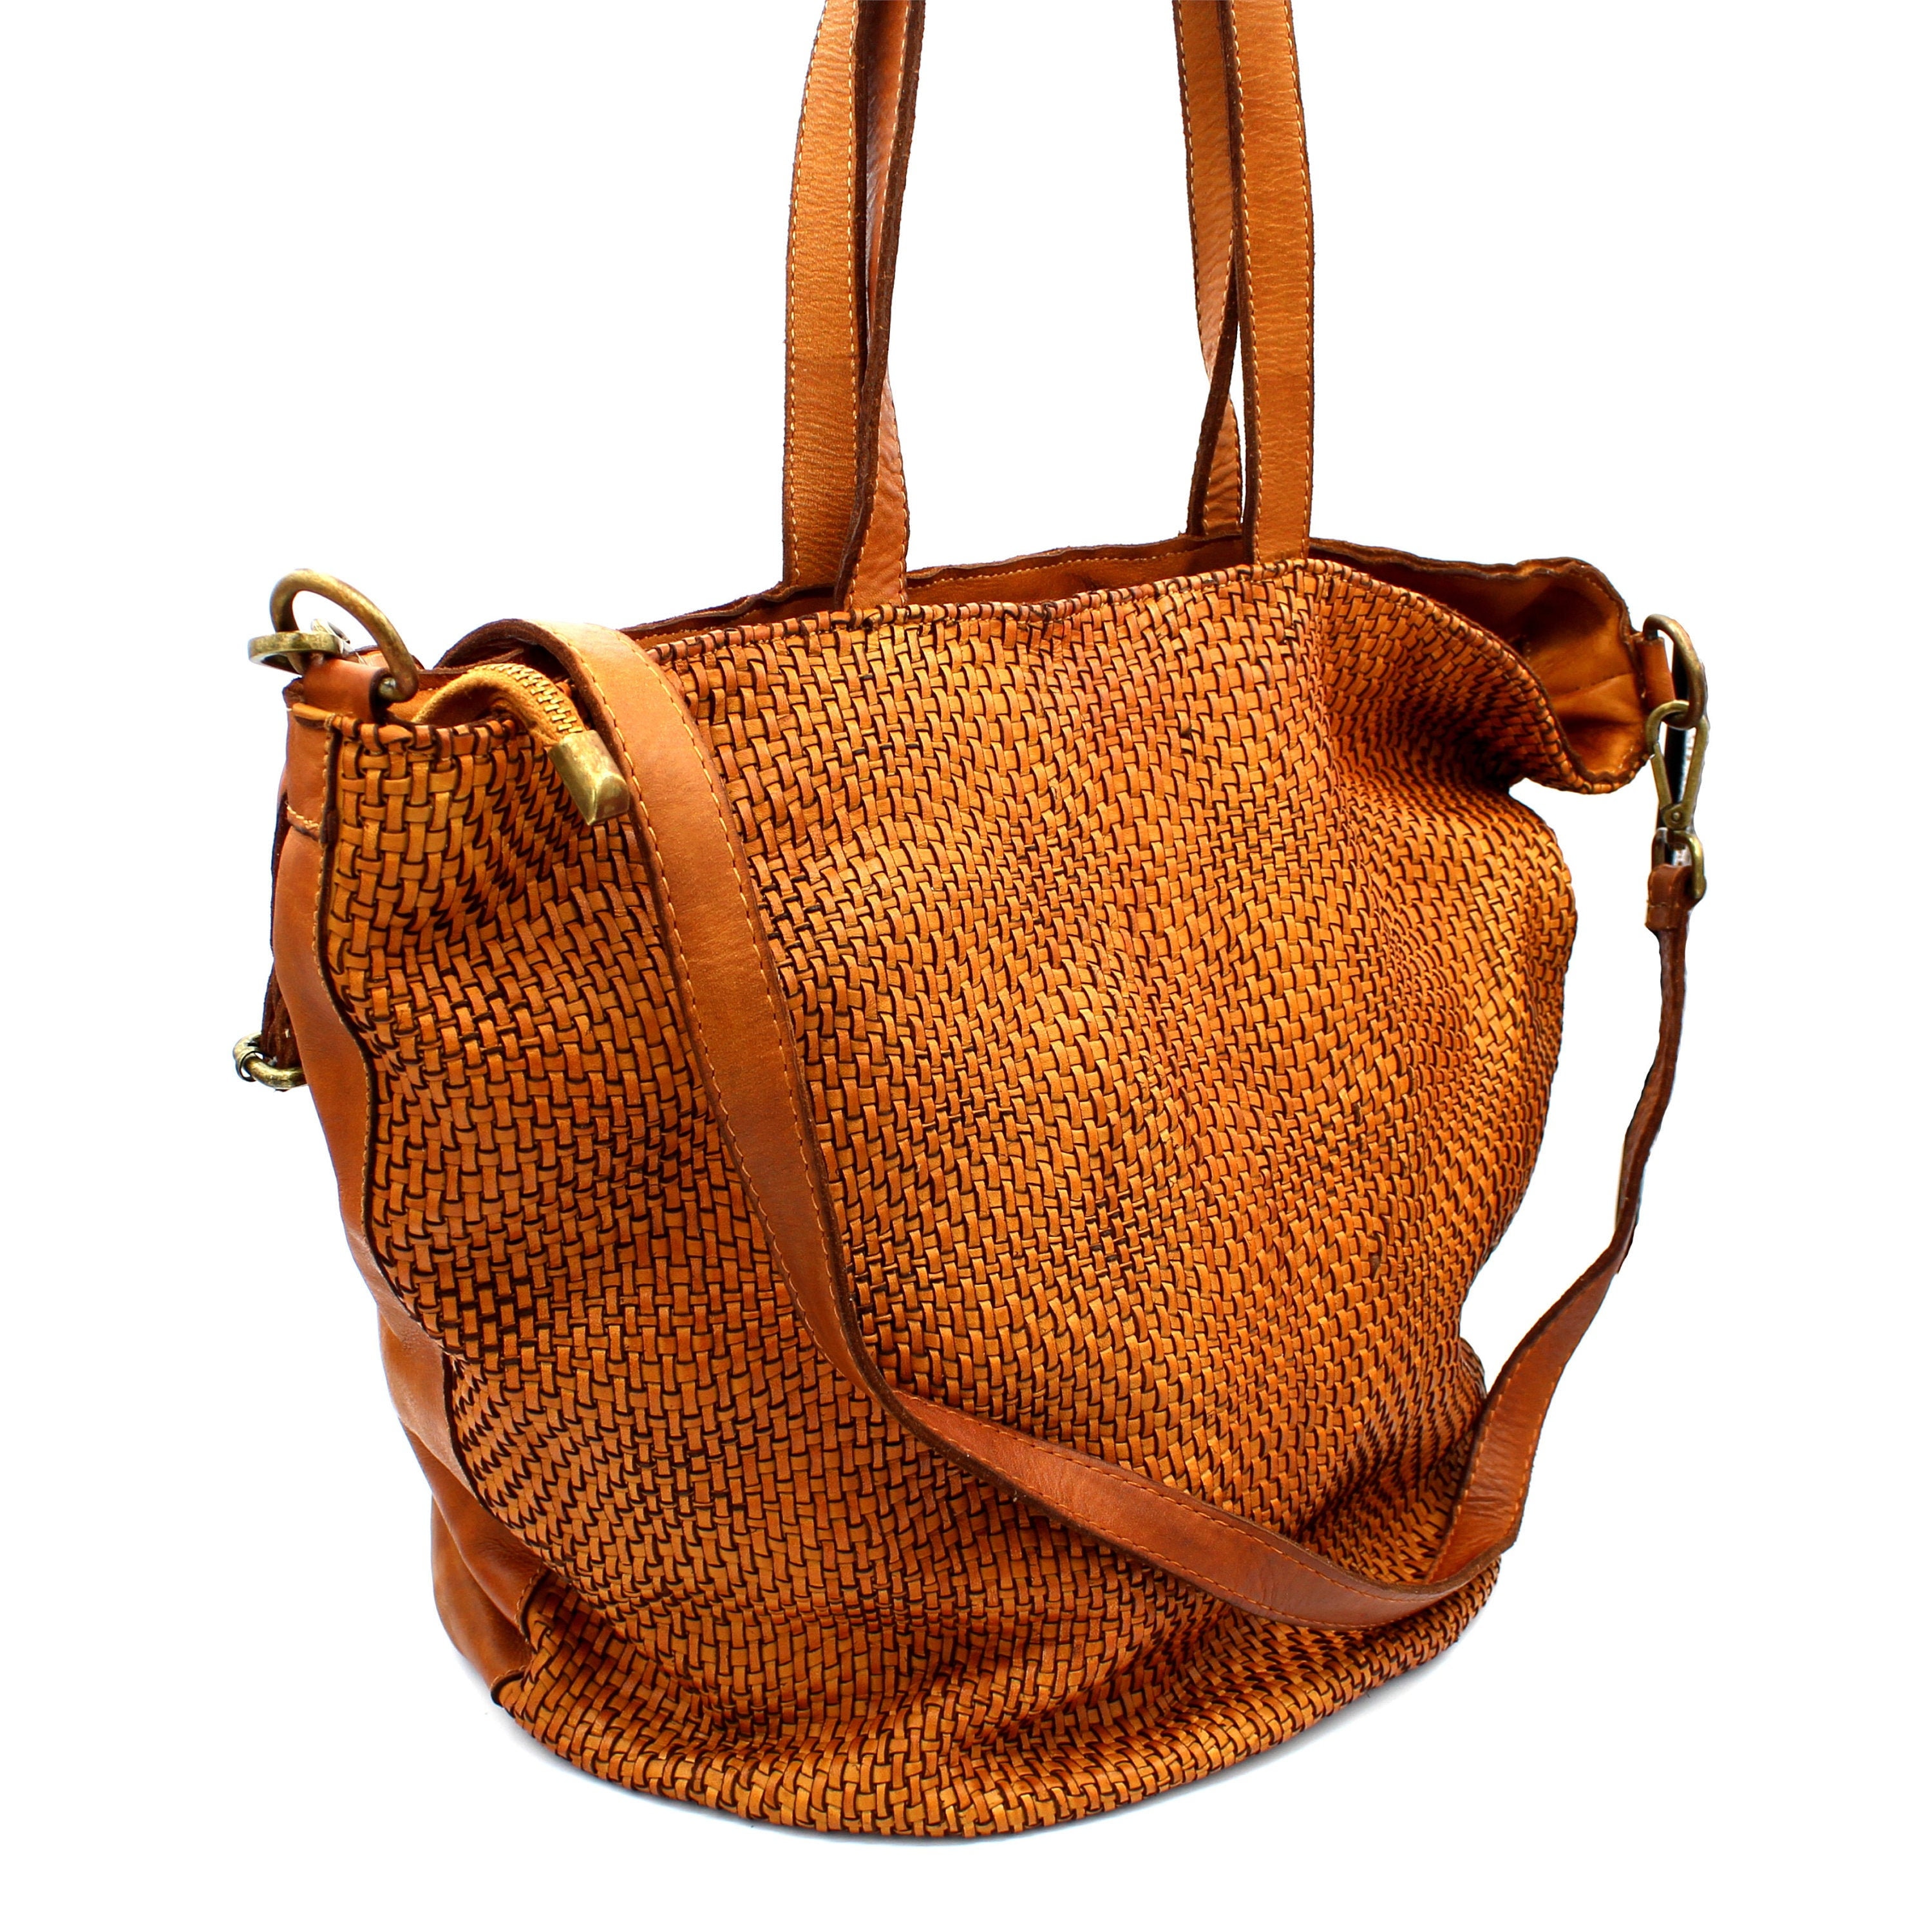 Woven Leather Bags Big Large Leather Shoulder Bag Made in - Etsy UK